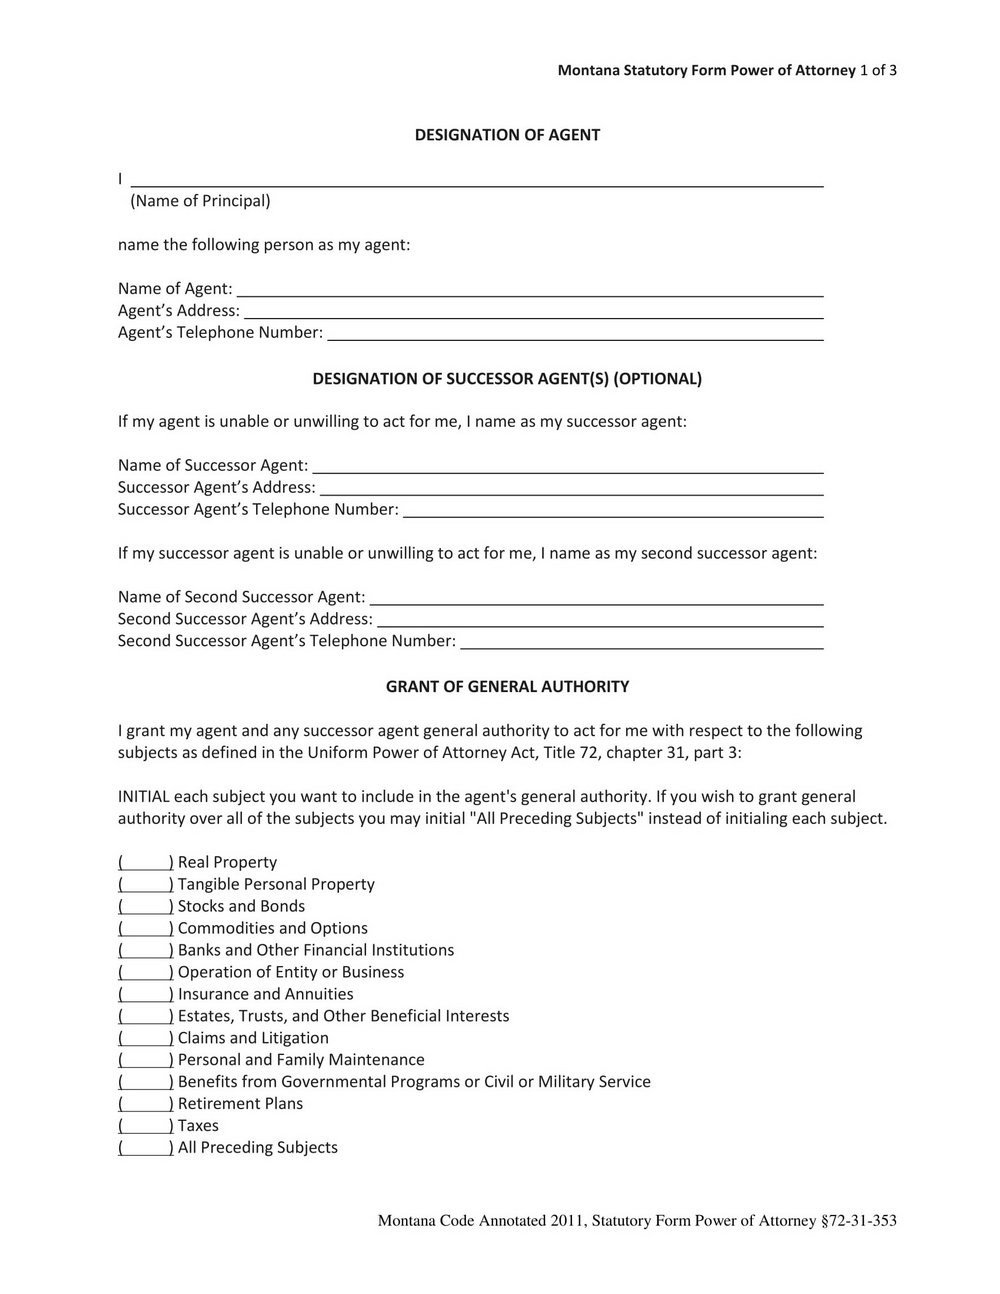 Blank Dd214 Form Download Forms 4209